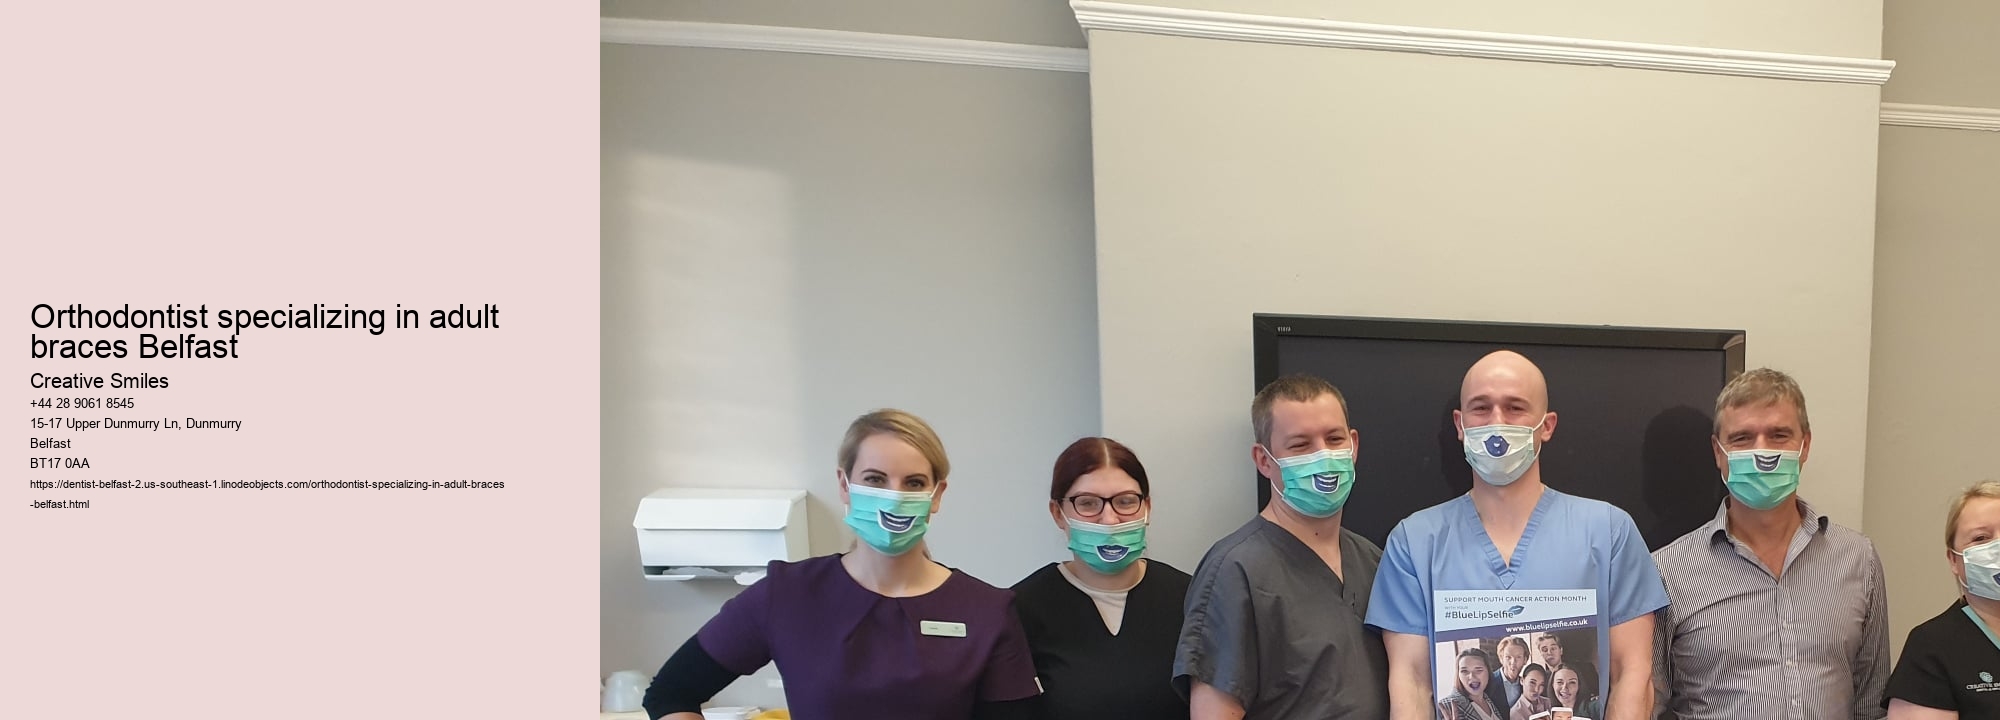 Orthodontist specializing in adult braces Belfast